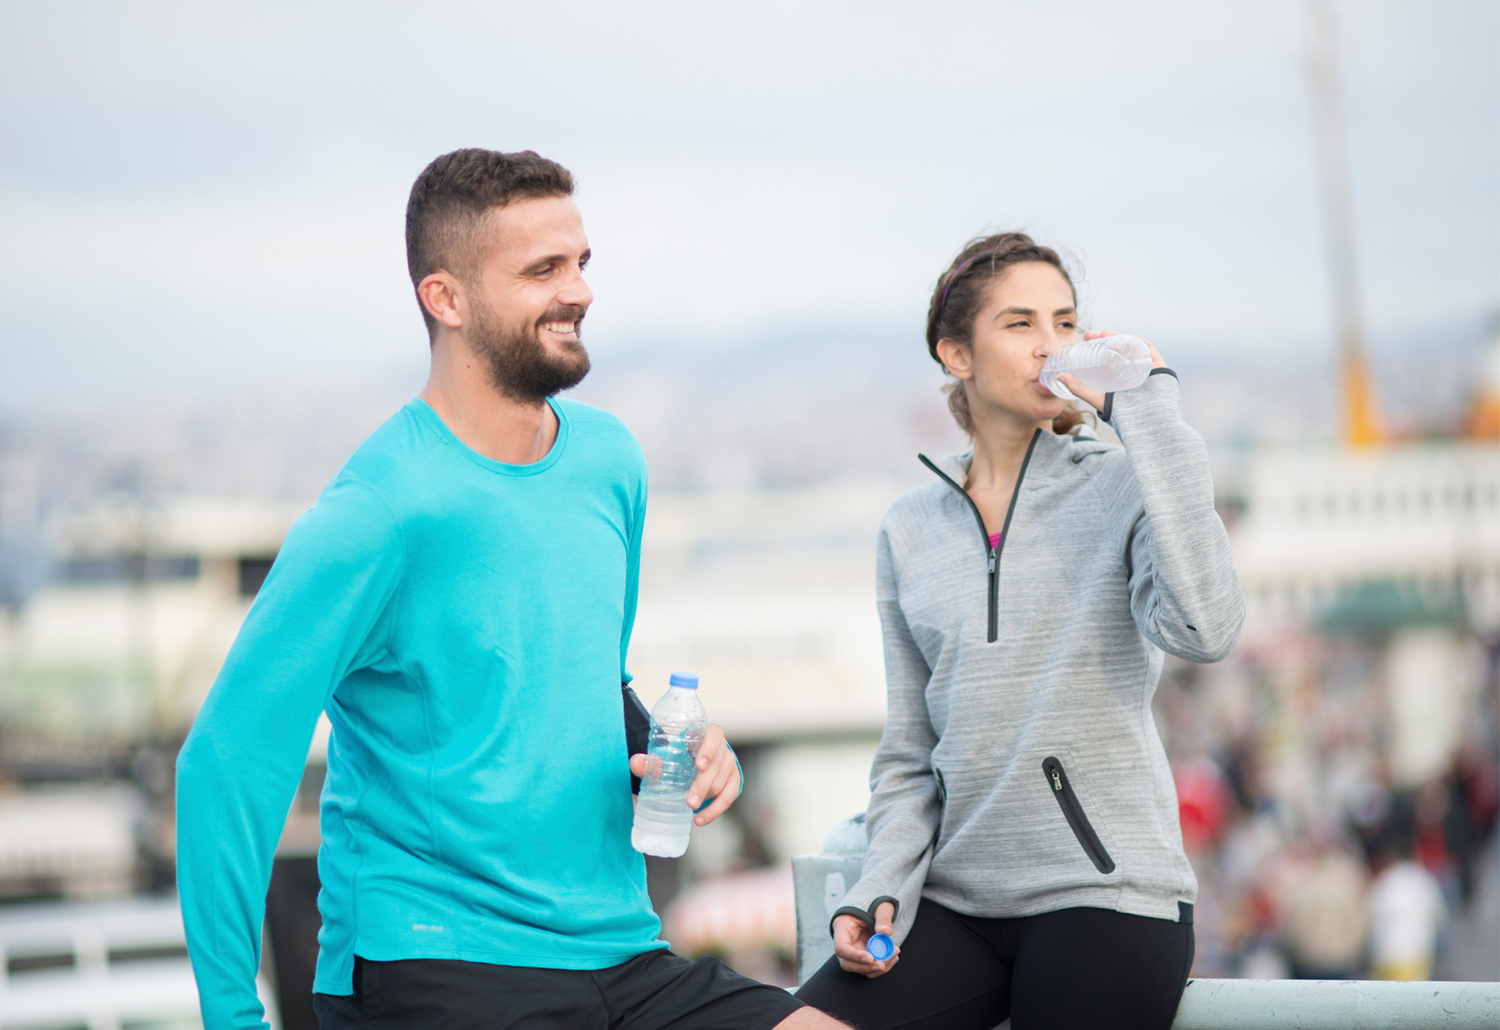 Importance Of Hydration During Exercise